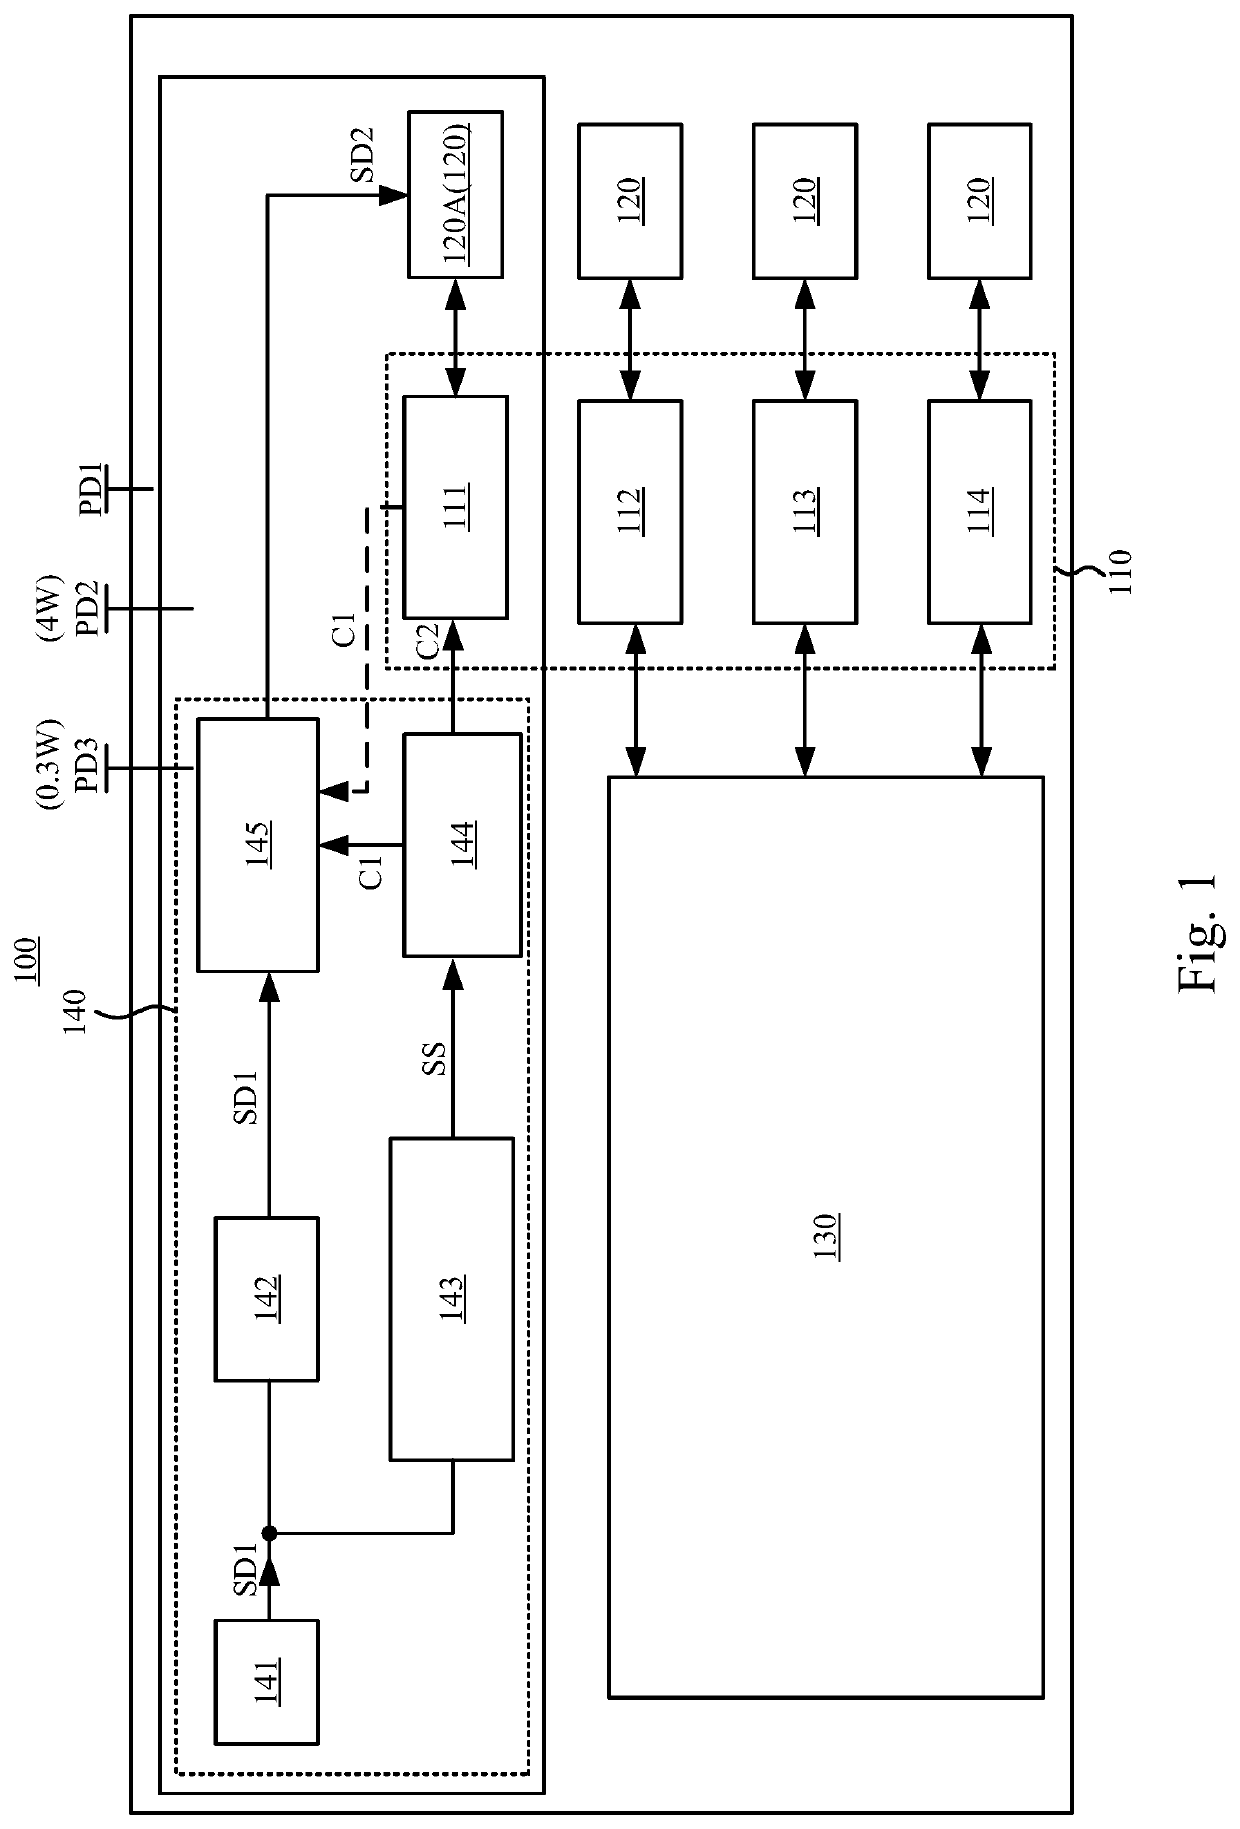 Processing system and voice detection method